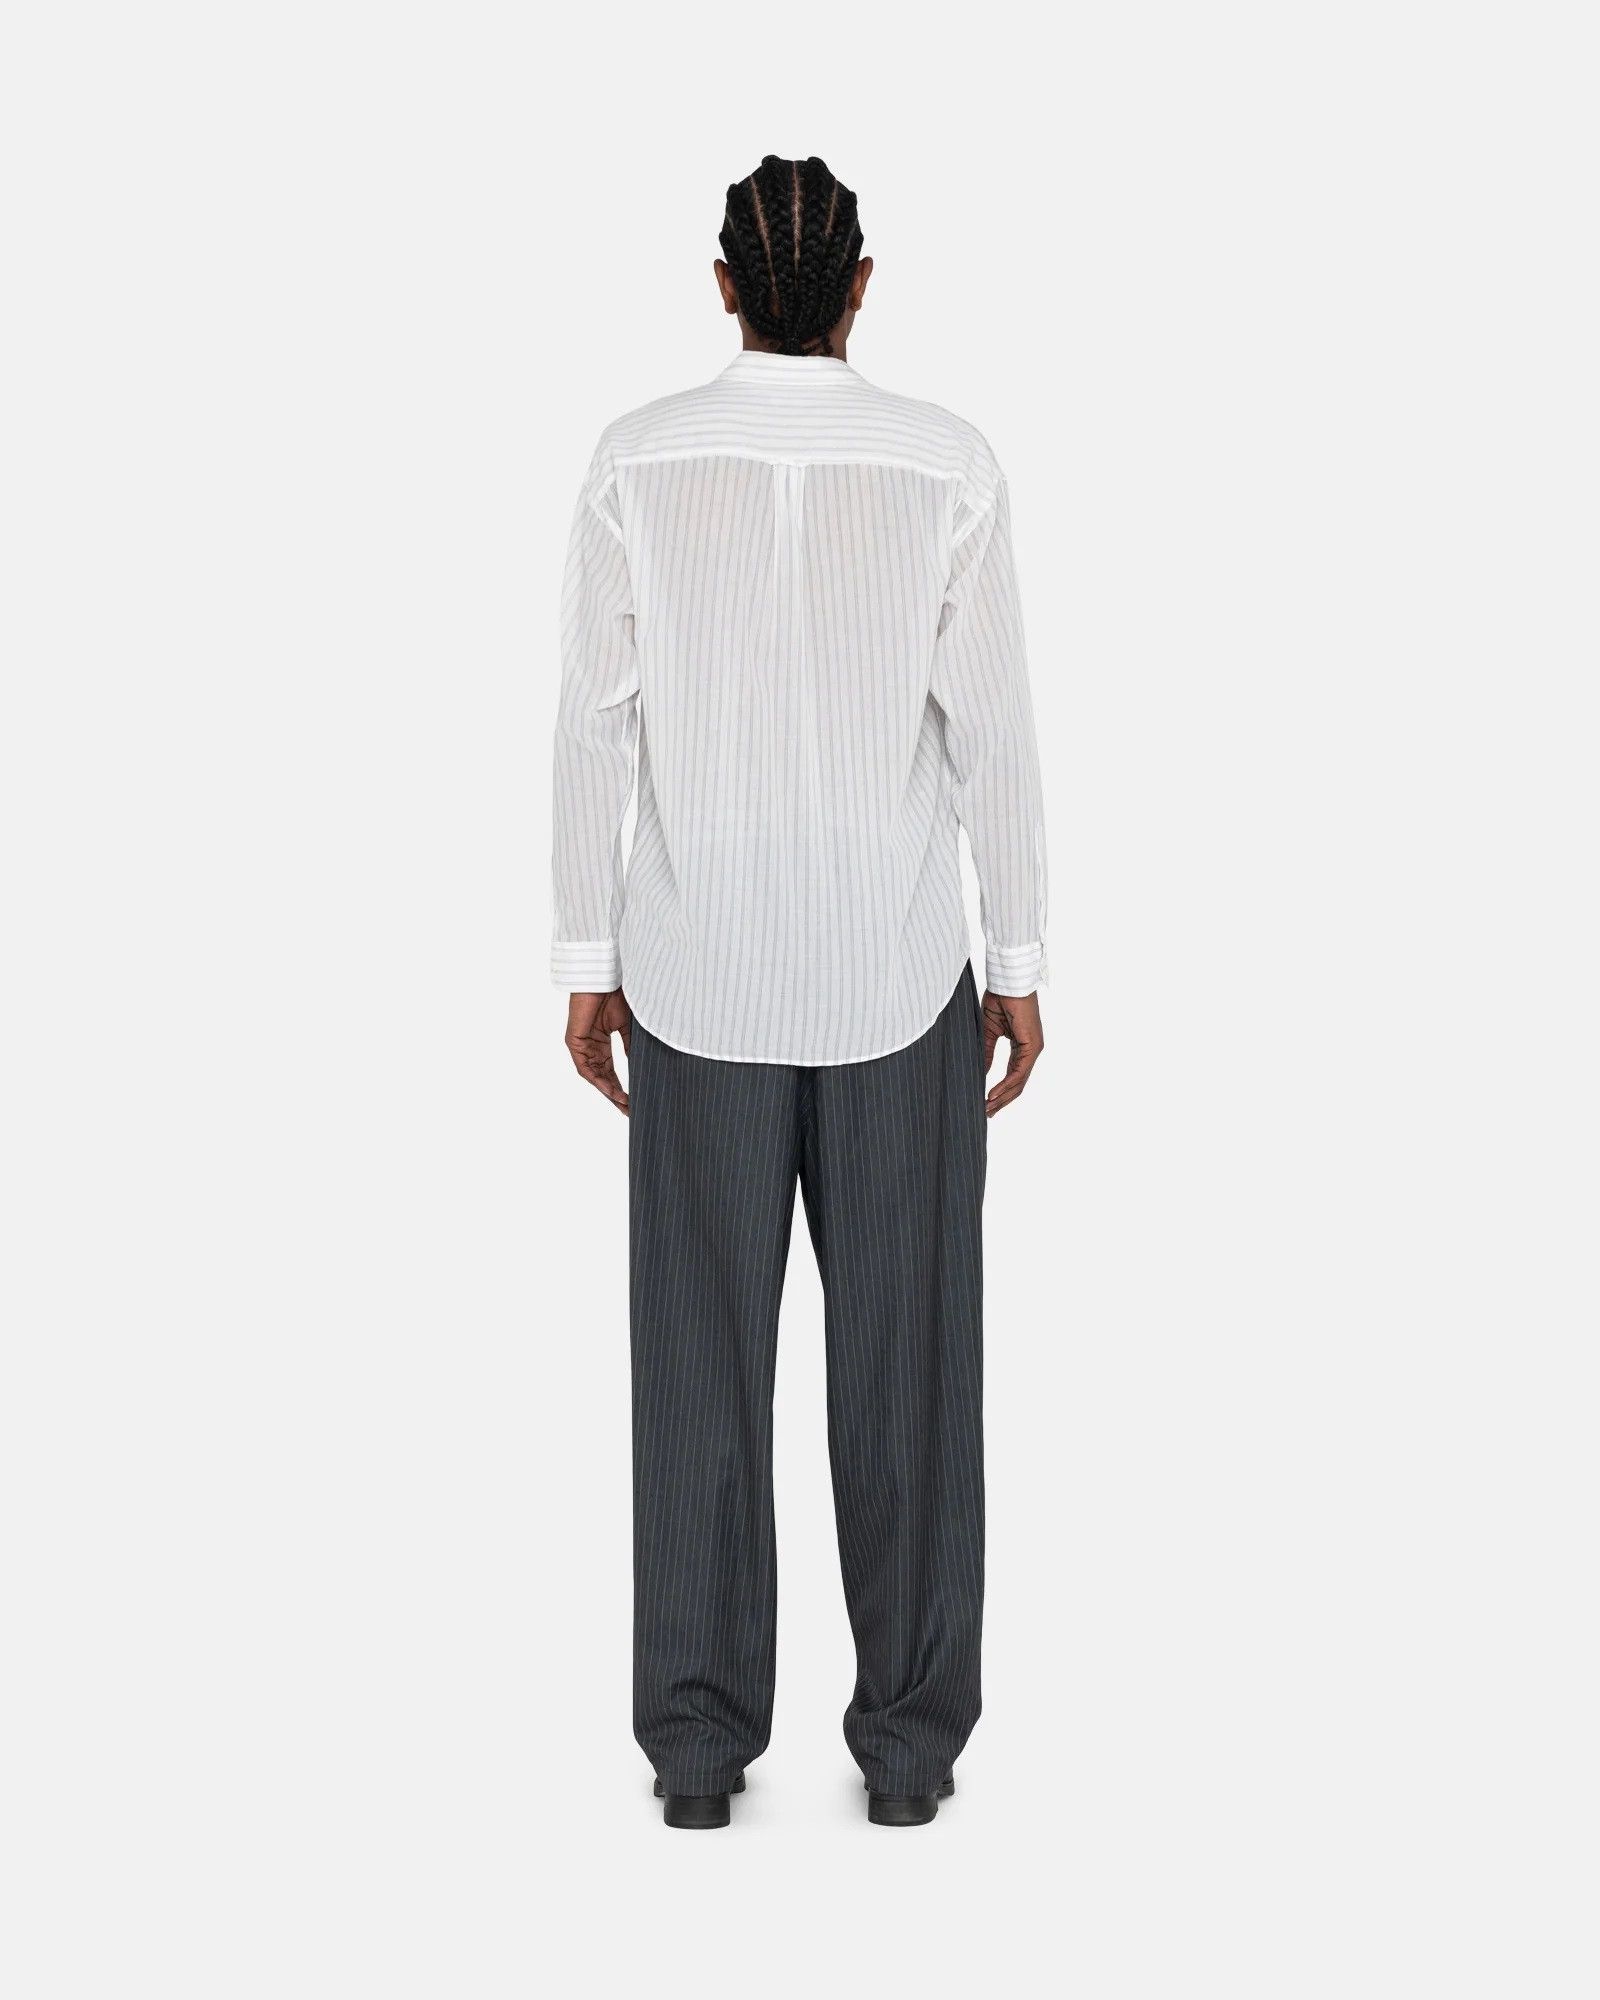 Stussy Stussy - S/S 22 - Striped Volume Pleated Trousers | Grailed